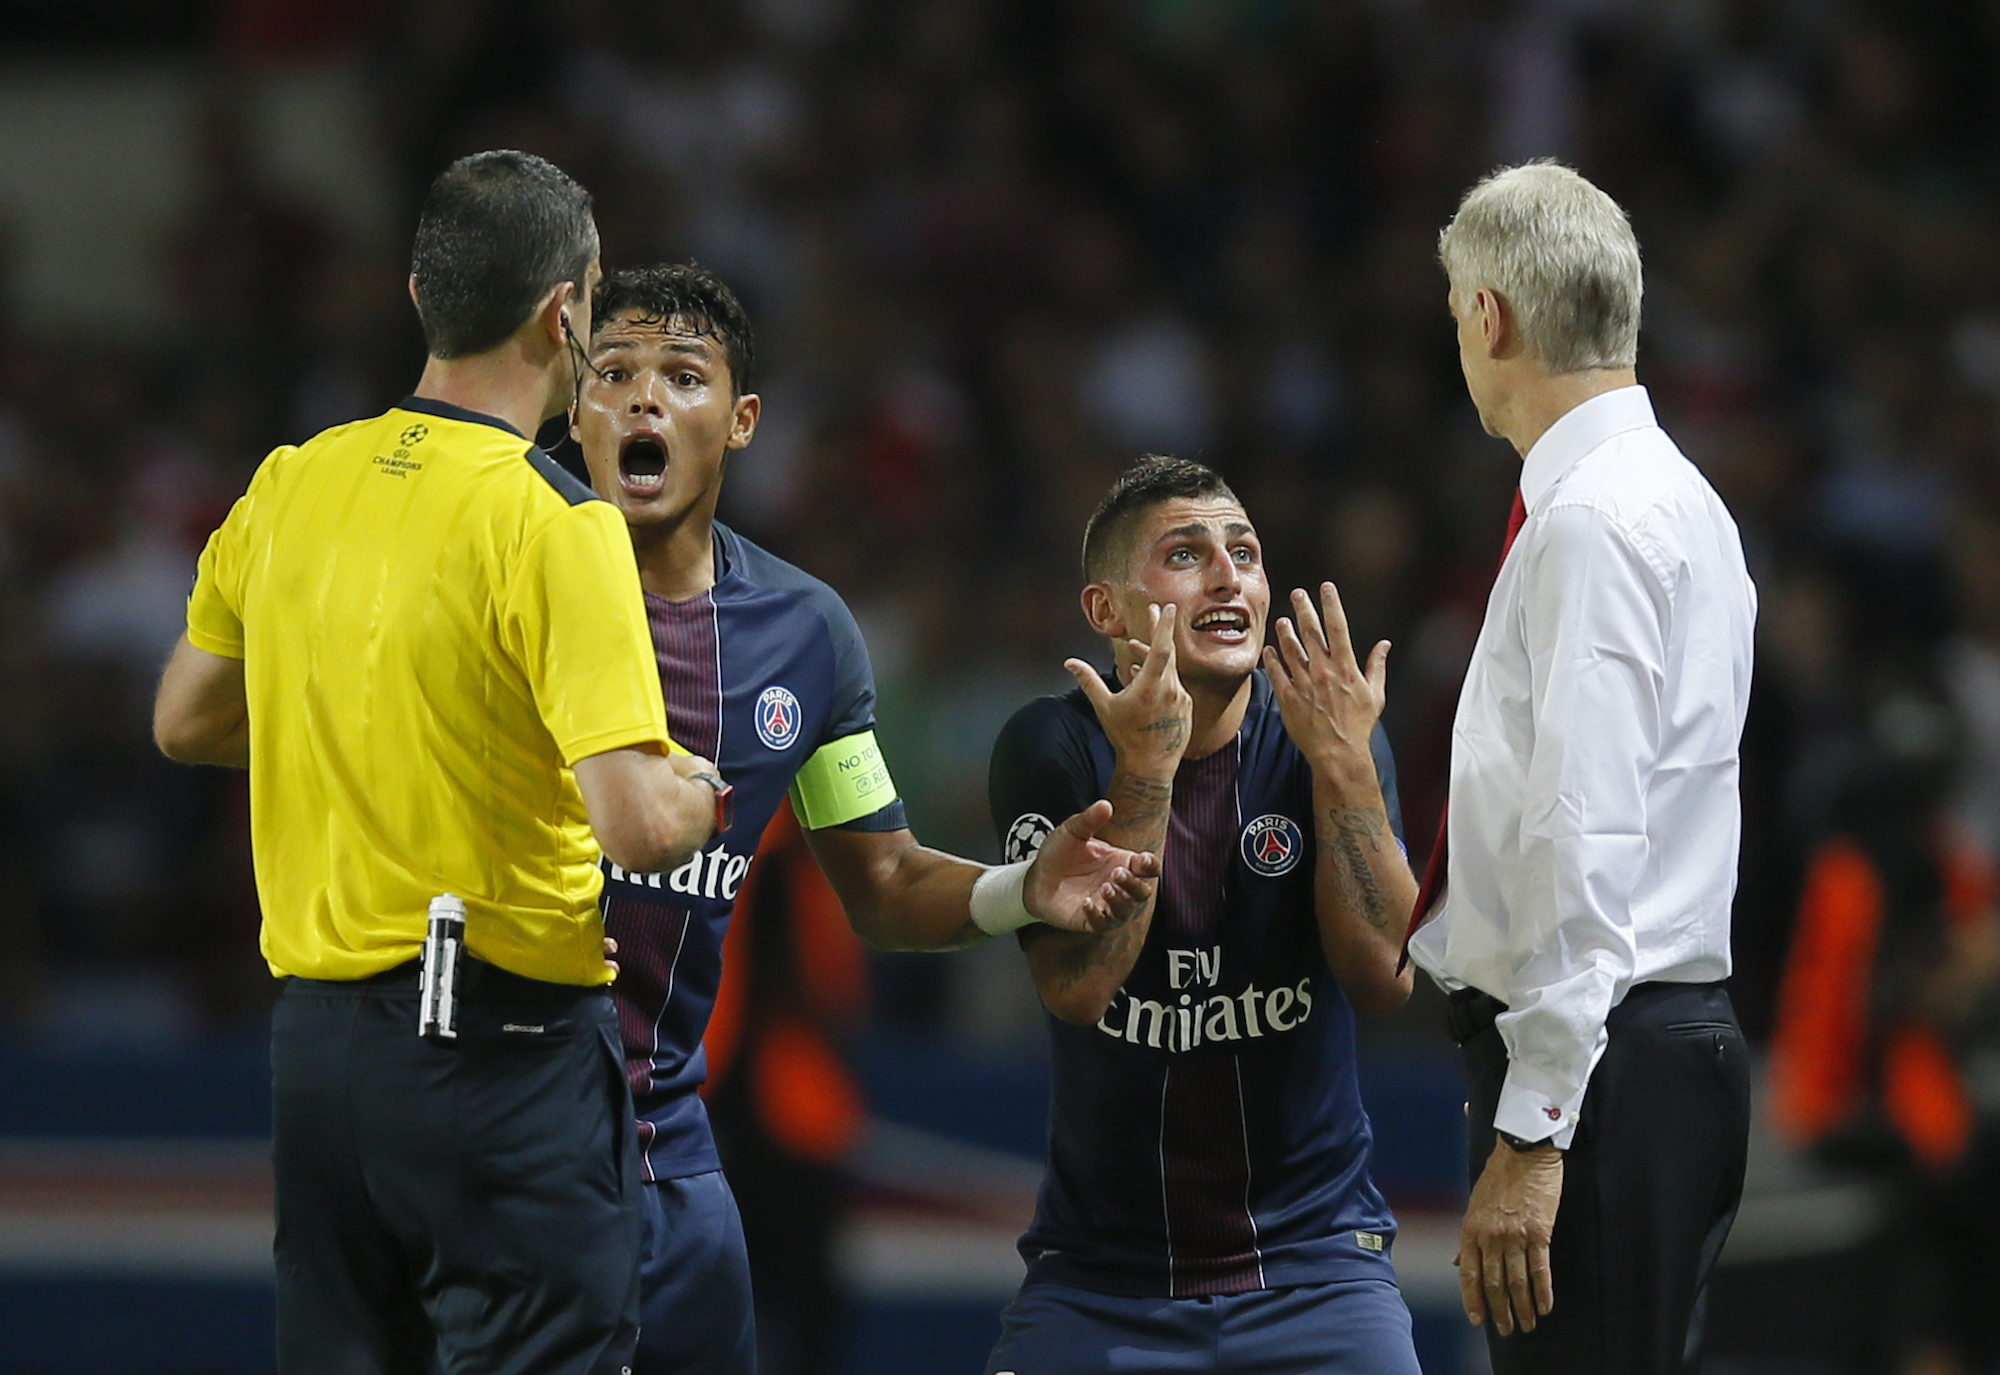 Football Soccer - Paris Saint-Germain v Arsenal - UEFA Champions League Group Stage - Group A - Parc des Princes, Paris, France - 13/9/16 Paris Saint-Germain's Marco Verratti after being shown a red card by referee Viktor Kassai as Arsenal manager Arsene Wenger looks on Reuters / Gonzalo Fuentes Livepic EDITORIAL USE ONLY.